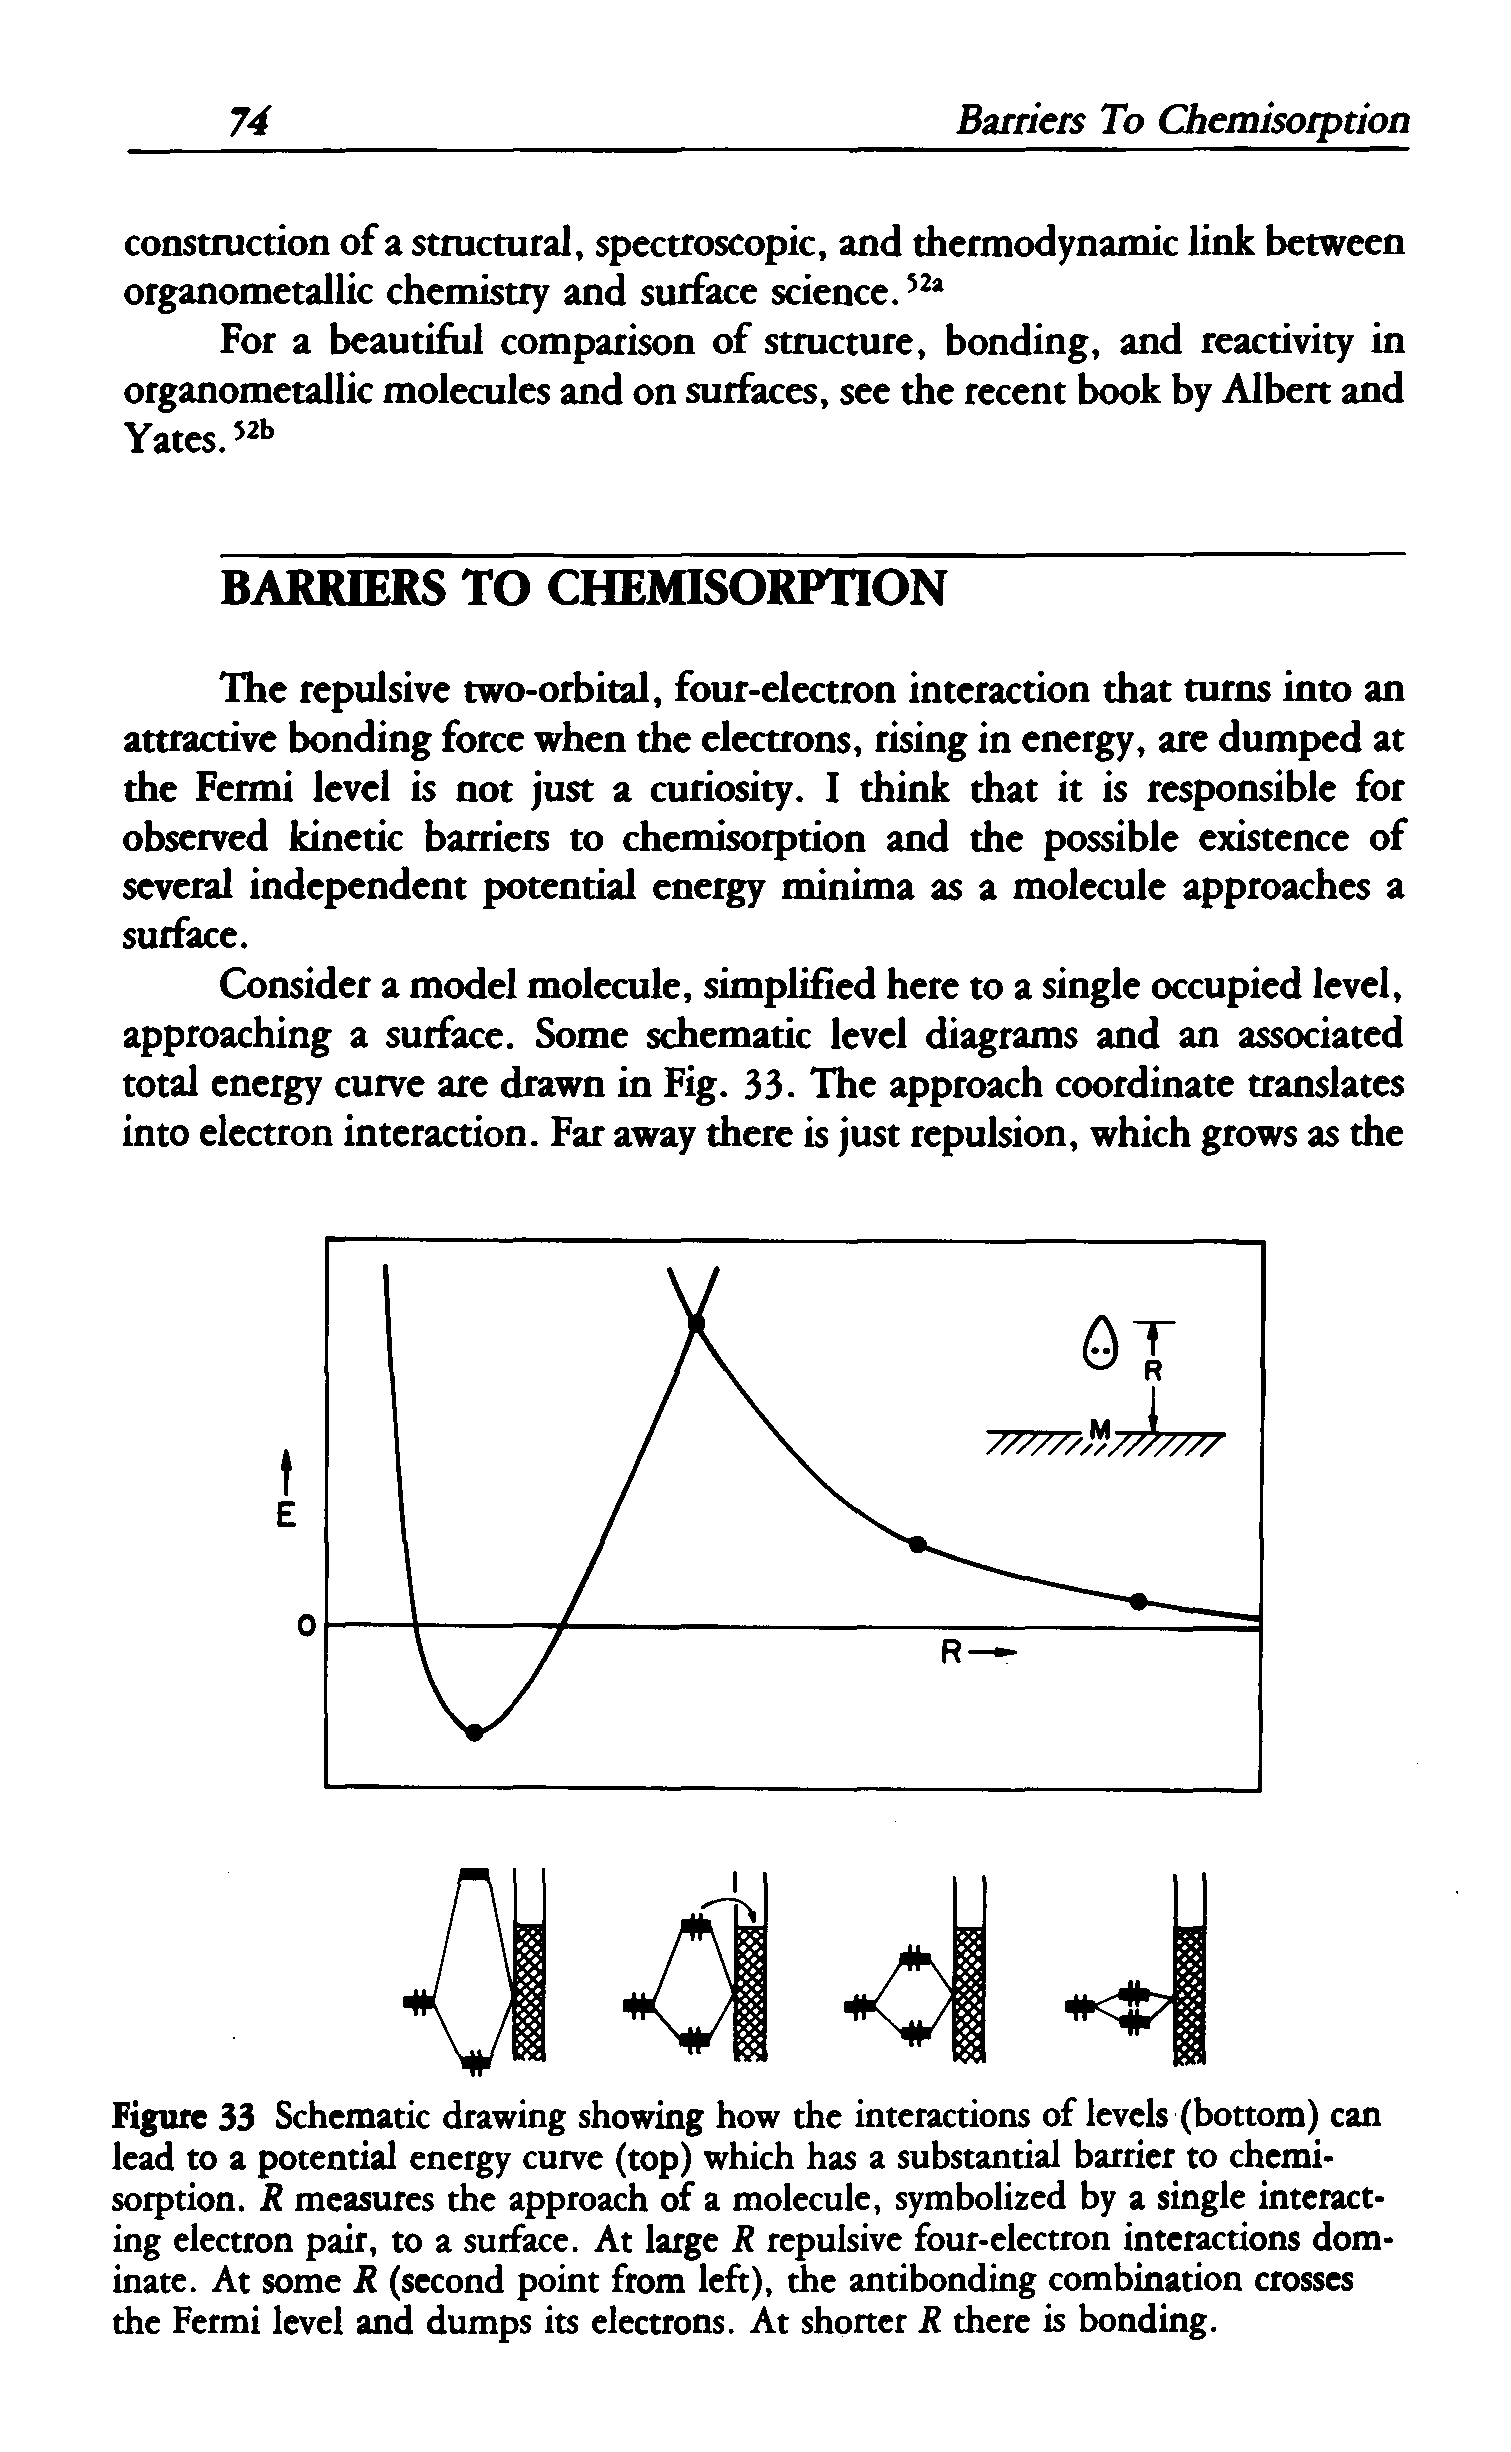 Figure 33 Schematic drawing showing how the interactions of levels (bottom) can lead to a potential energy curve (top) which has a substantial barrier to chemisorption. R measures the approach of a molecule, symbolized by a single interacting electron pair, to a surface. At large R repulsive four-electron interactions dominate. At some R (second point from left), die antibonding combination crosses the Fermi level and dumps its electrons. At shorter R there is bonding.